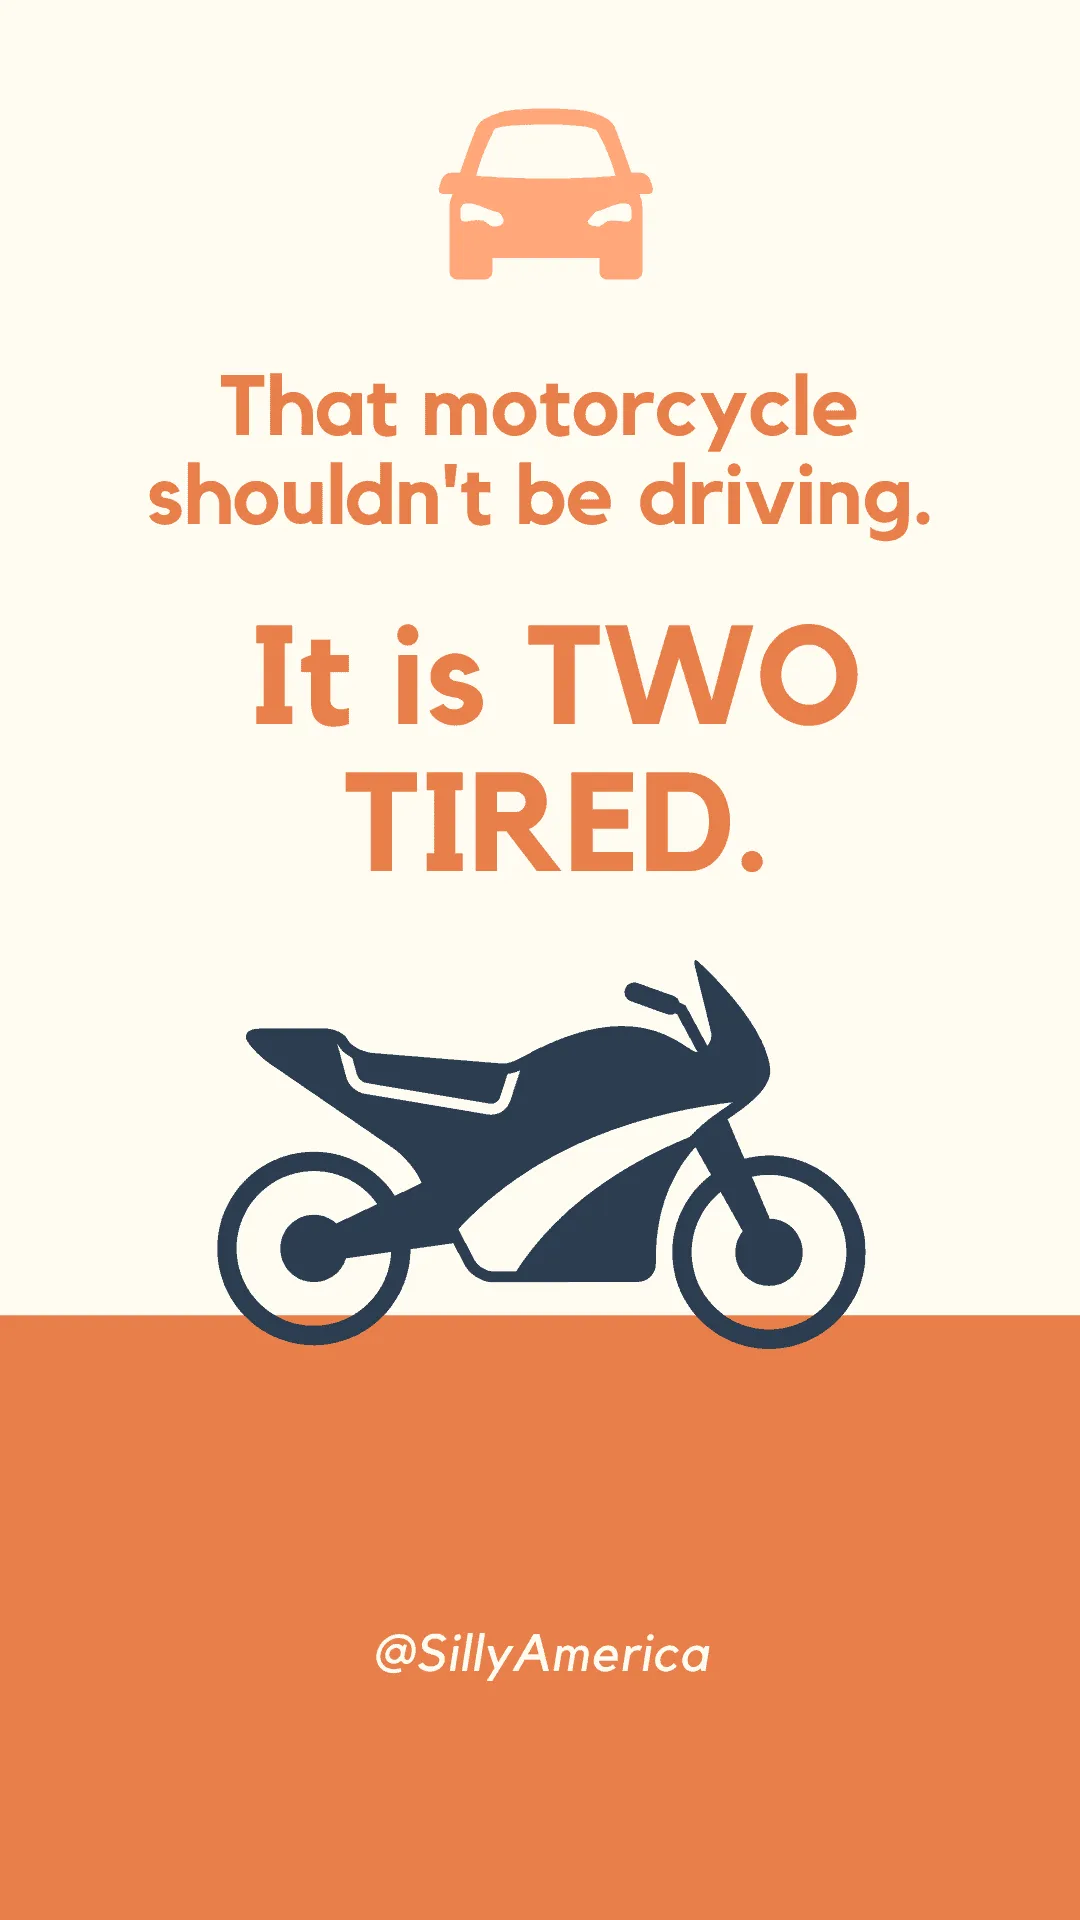 That motorcycle shouldn't be driving. It is TWO TIRED. - Car Puns to fuel your road trip content!